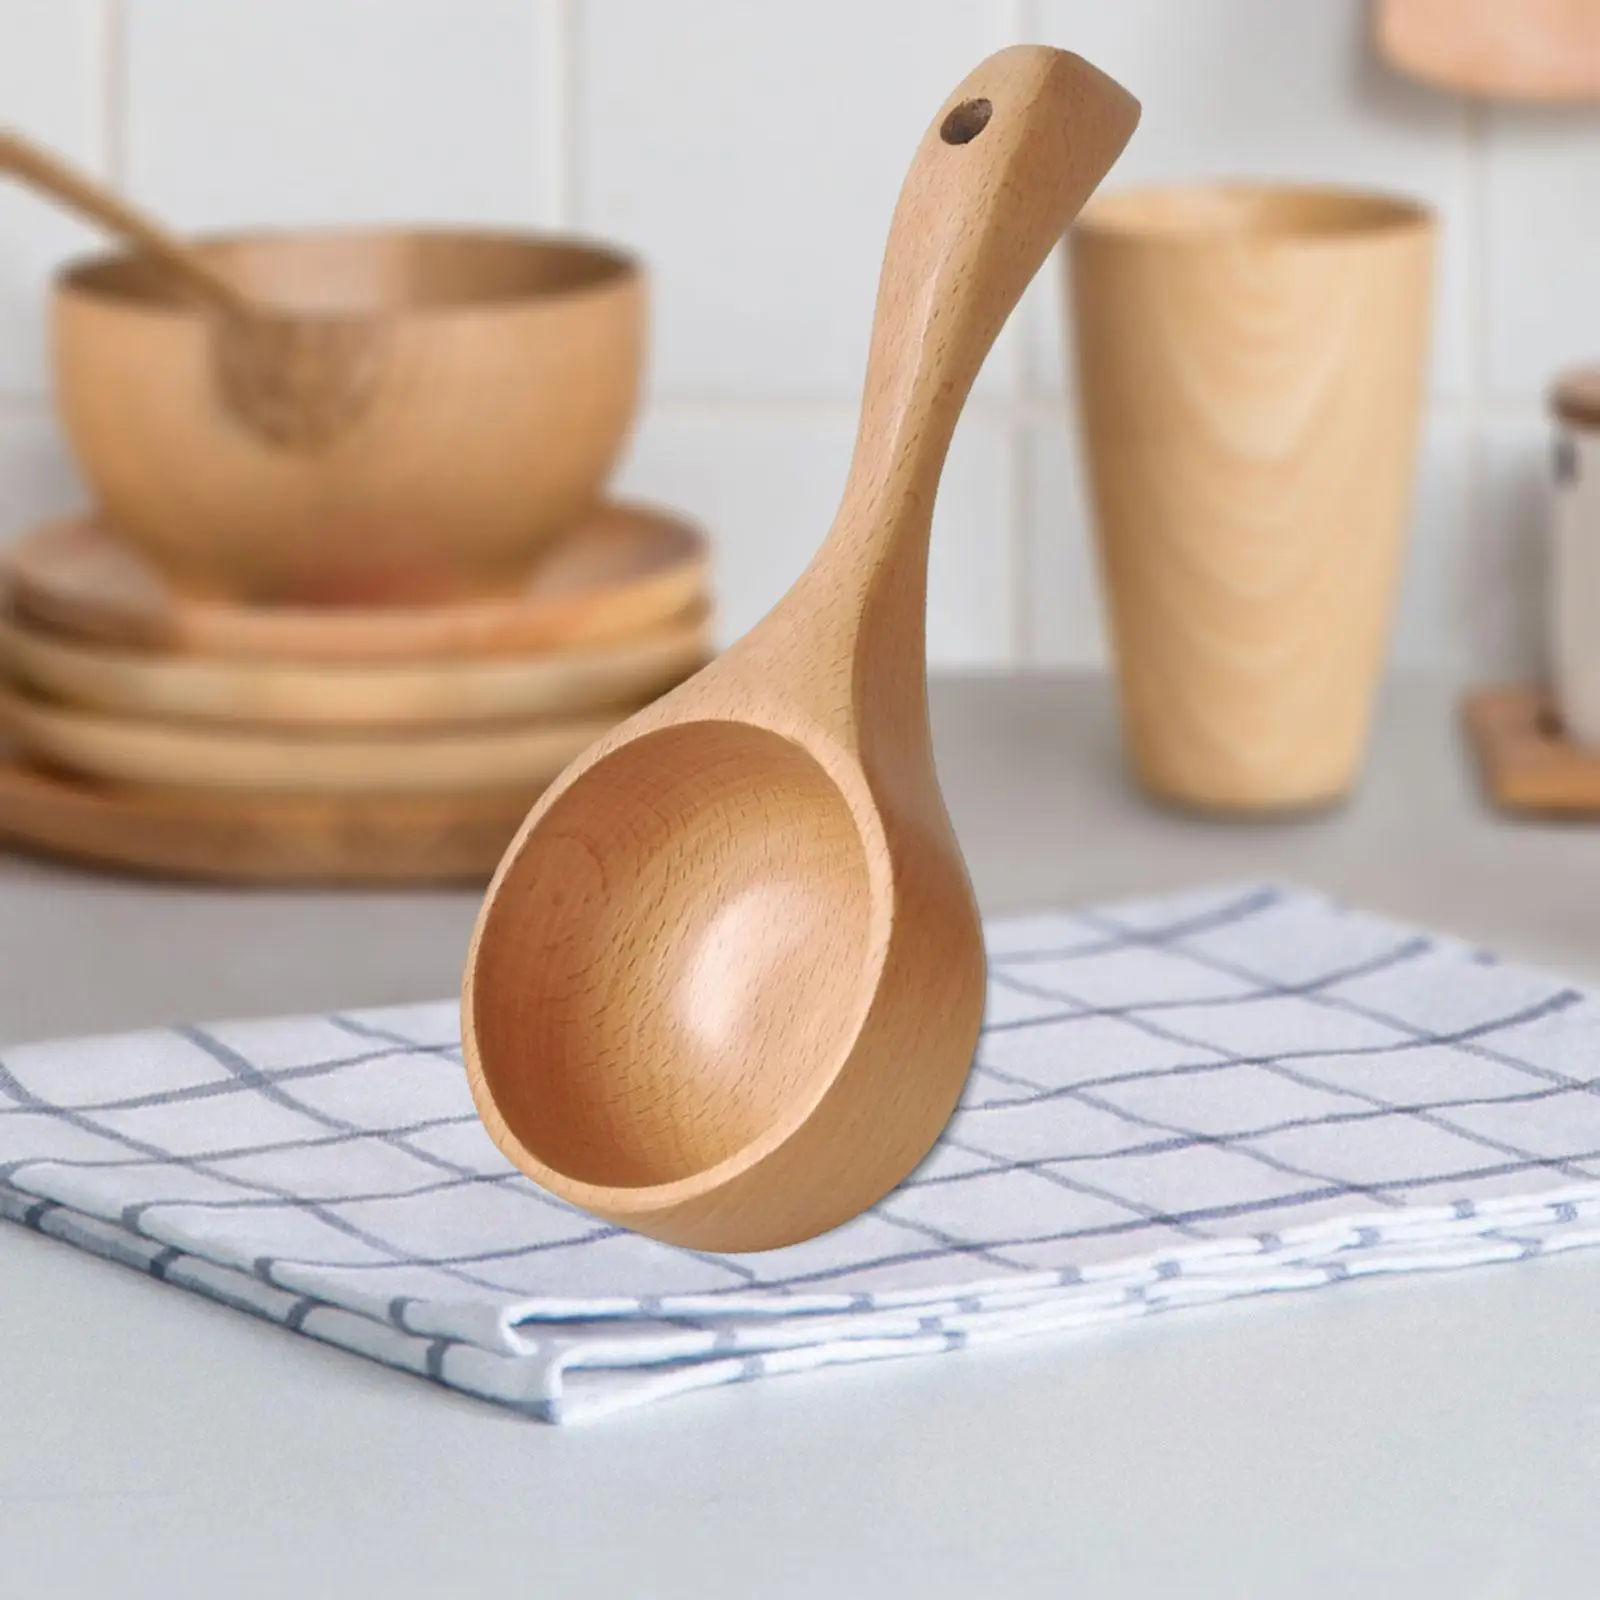 Wooden Ladle Spoon Handmade Kitchen Utensil Serving Soup Tablespoon Water Spoon for Bath Salt Canisters Flour Cooking Porridge